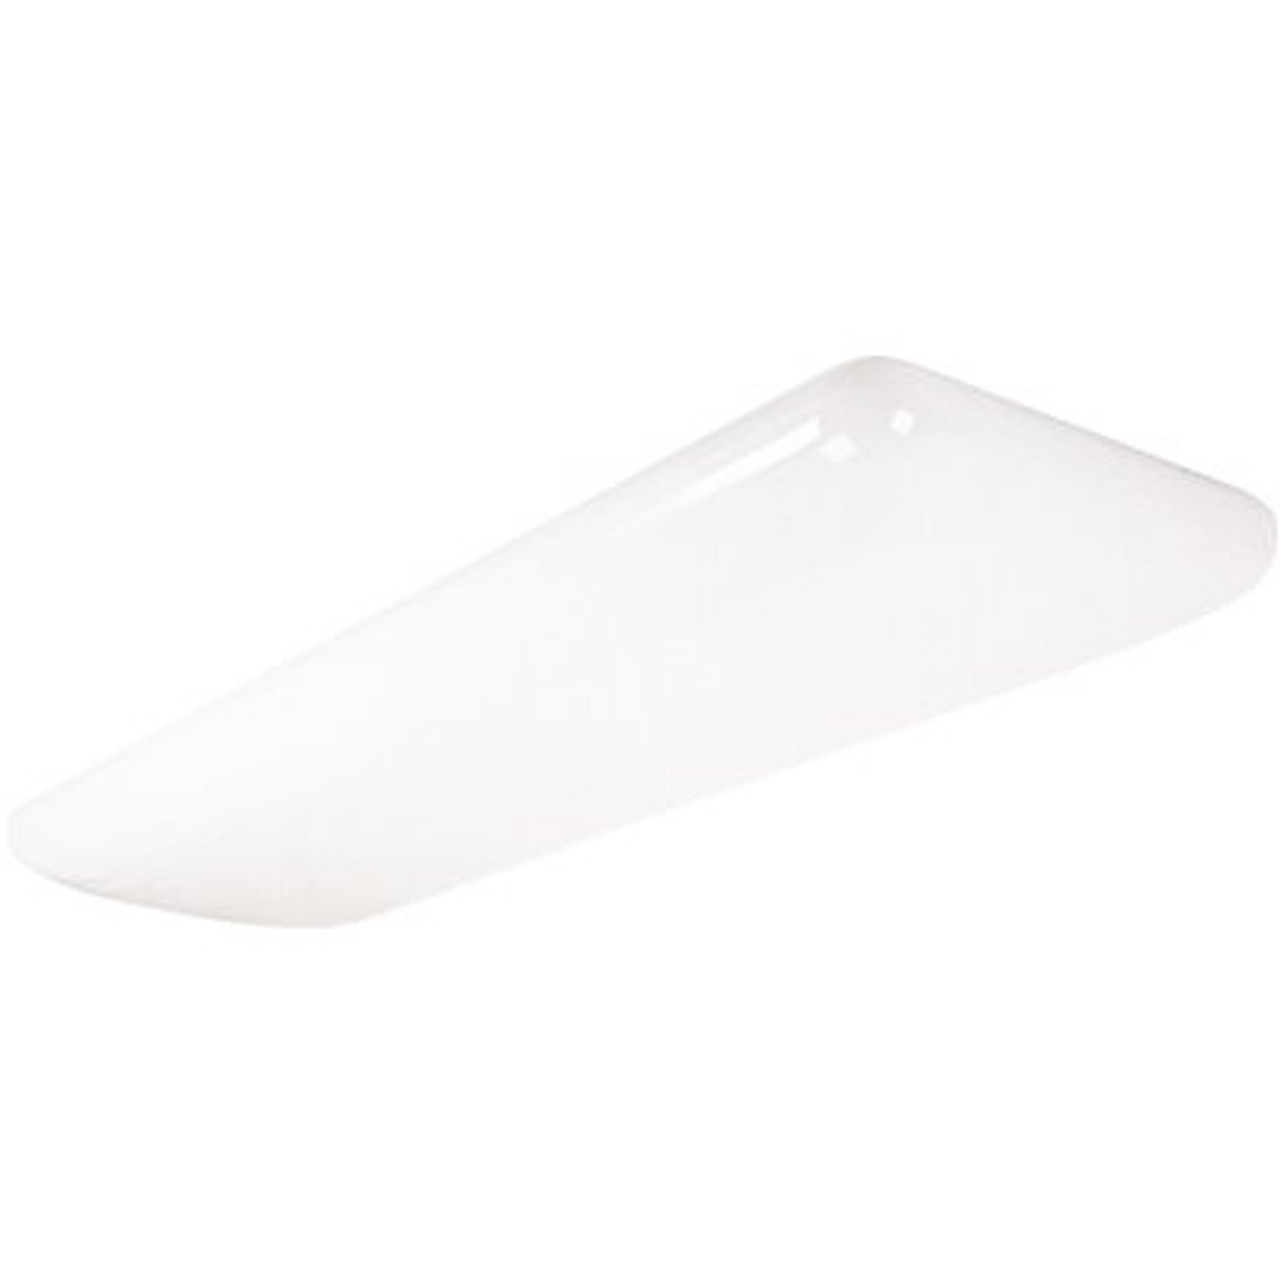 Lithonia Lighting 1-1/2 ft. x 4 ft. White Acrylic Diffuser